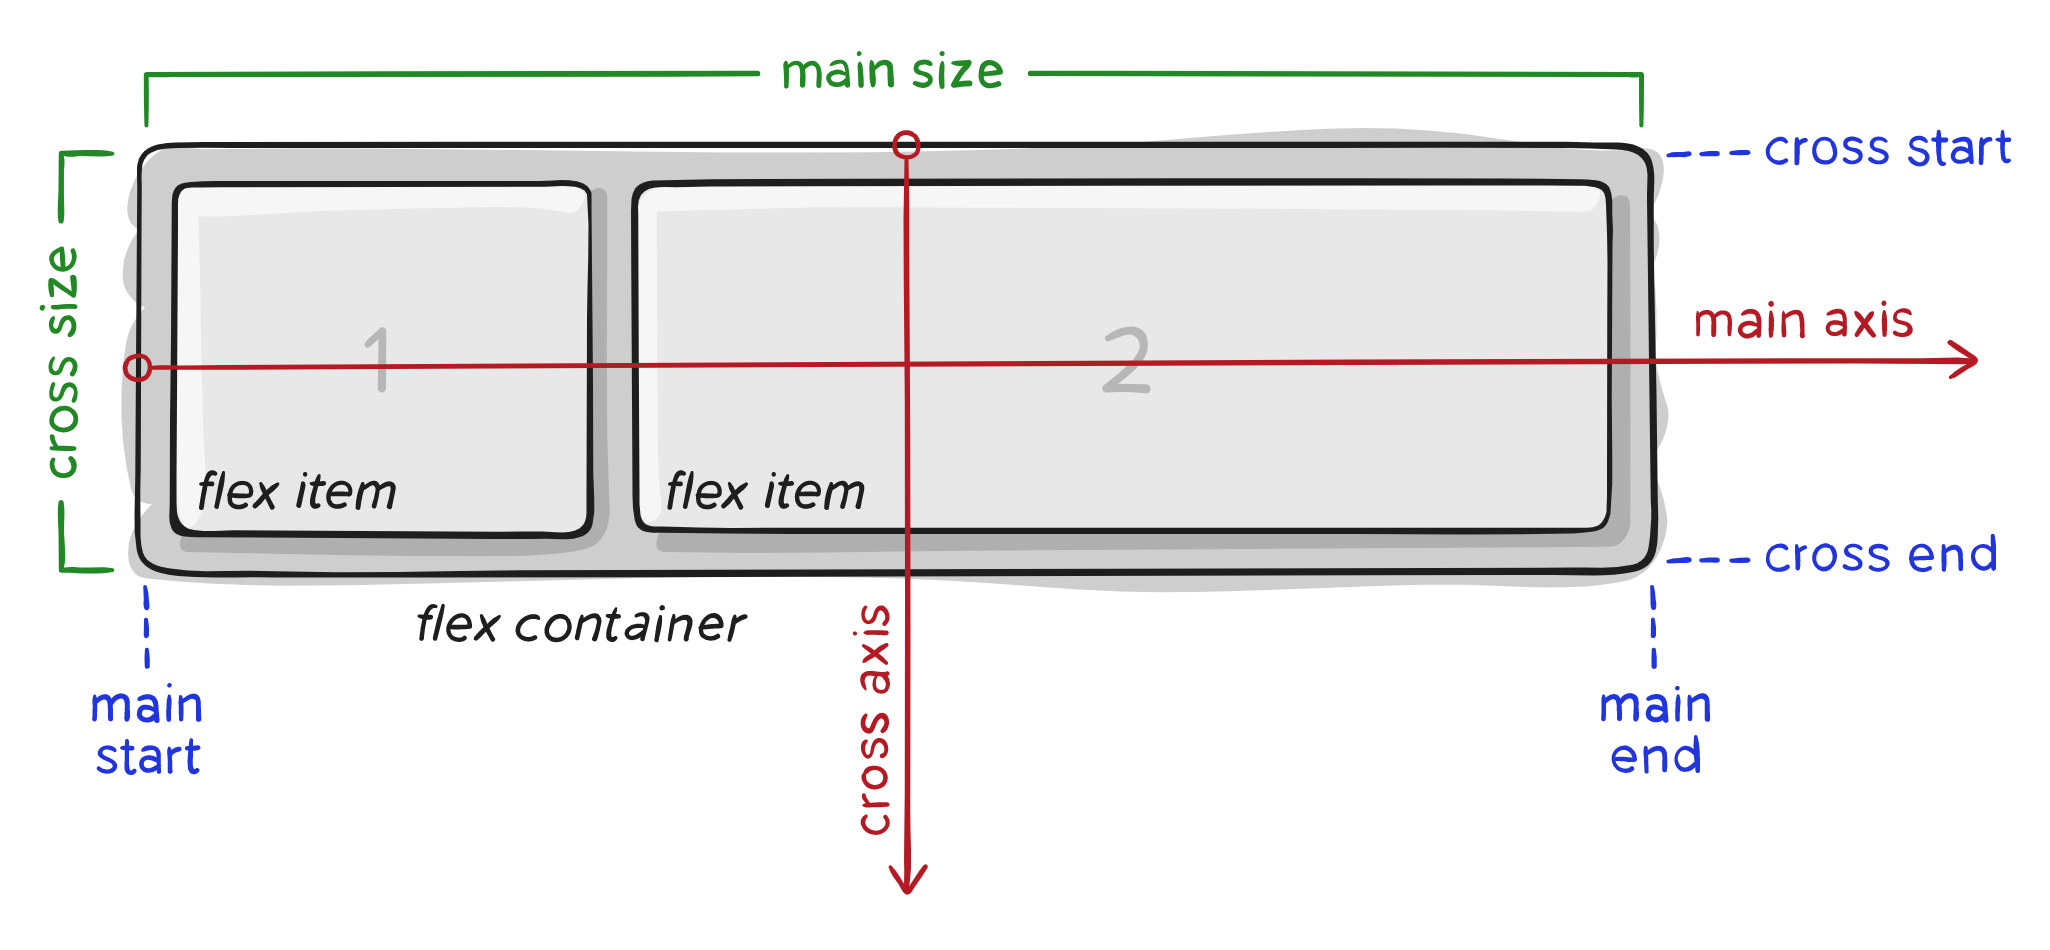 flex axis - main axis and cross axis